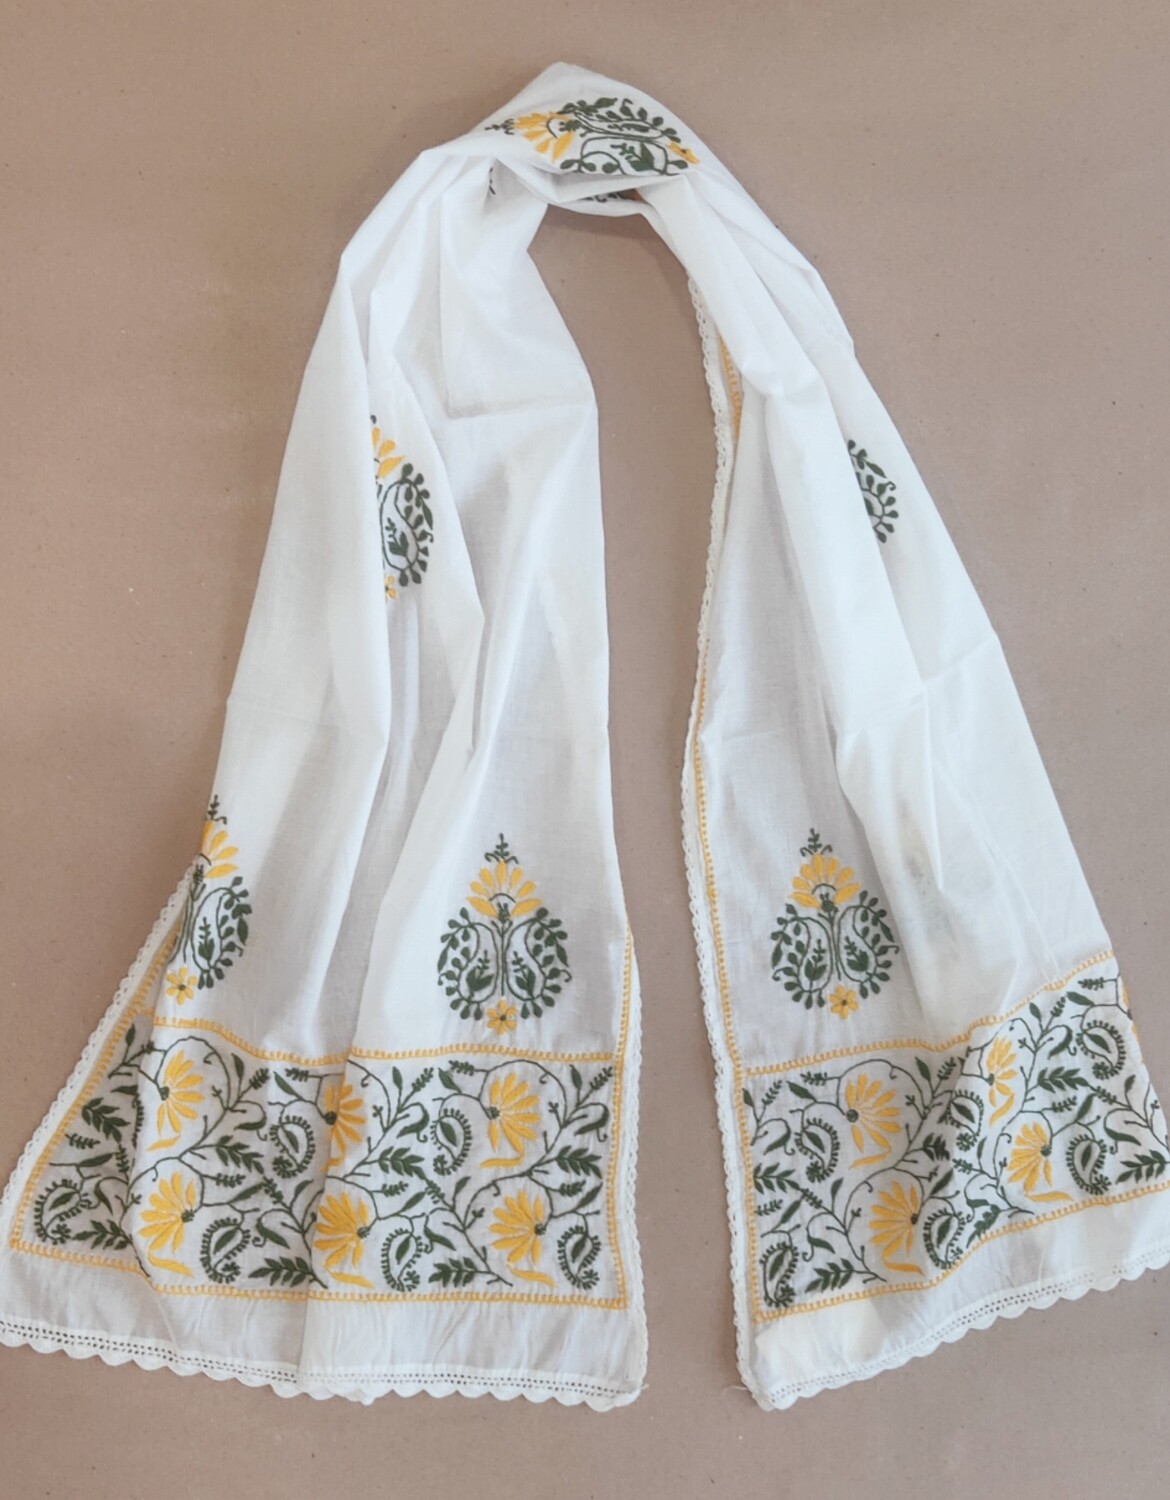 White stole with yellow and green embroidery